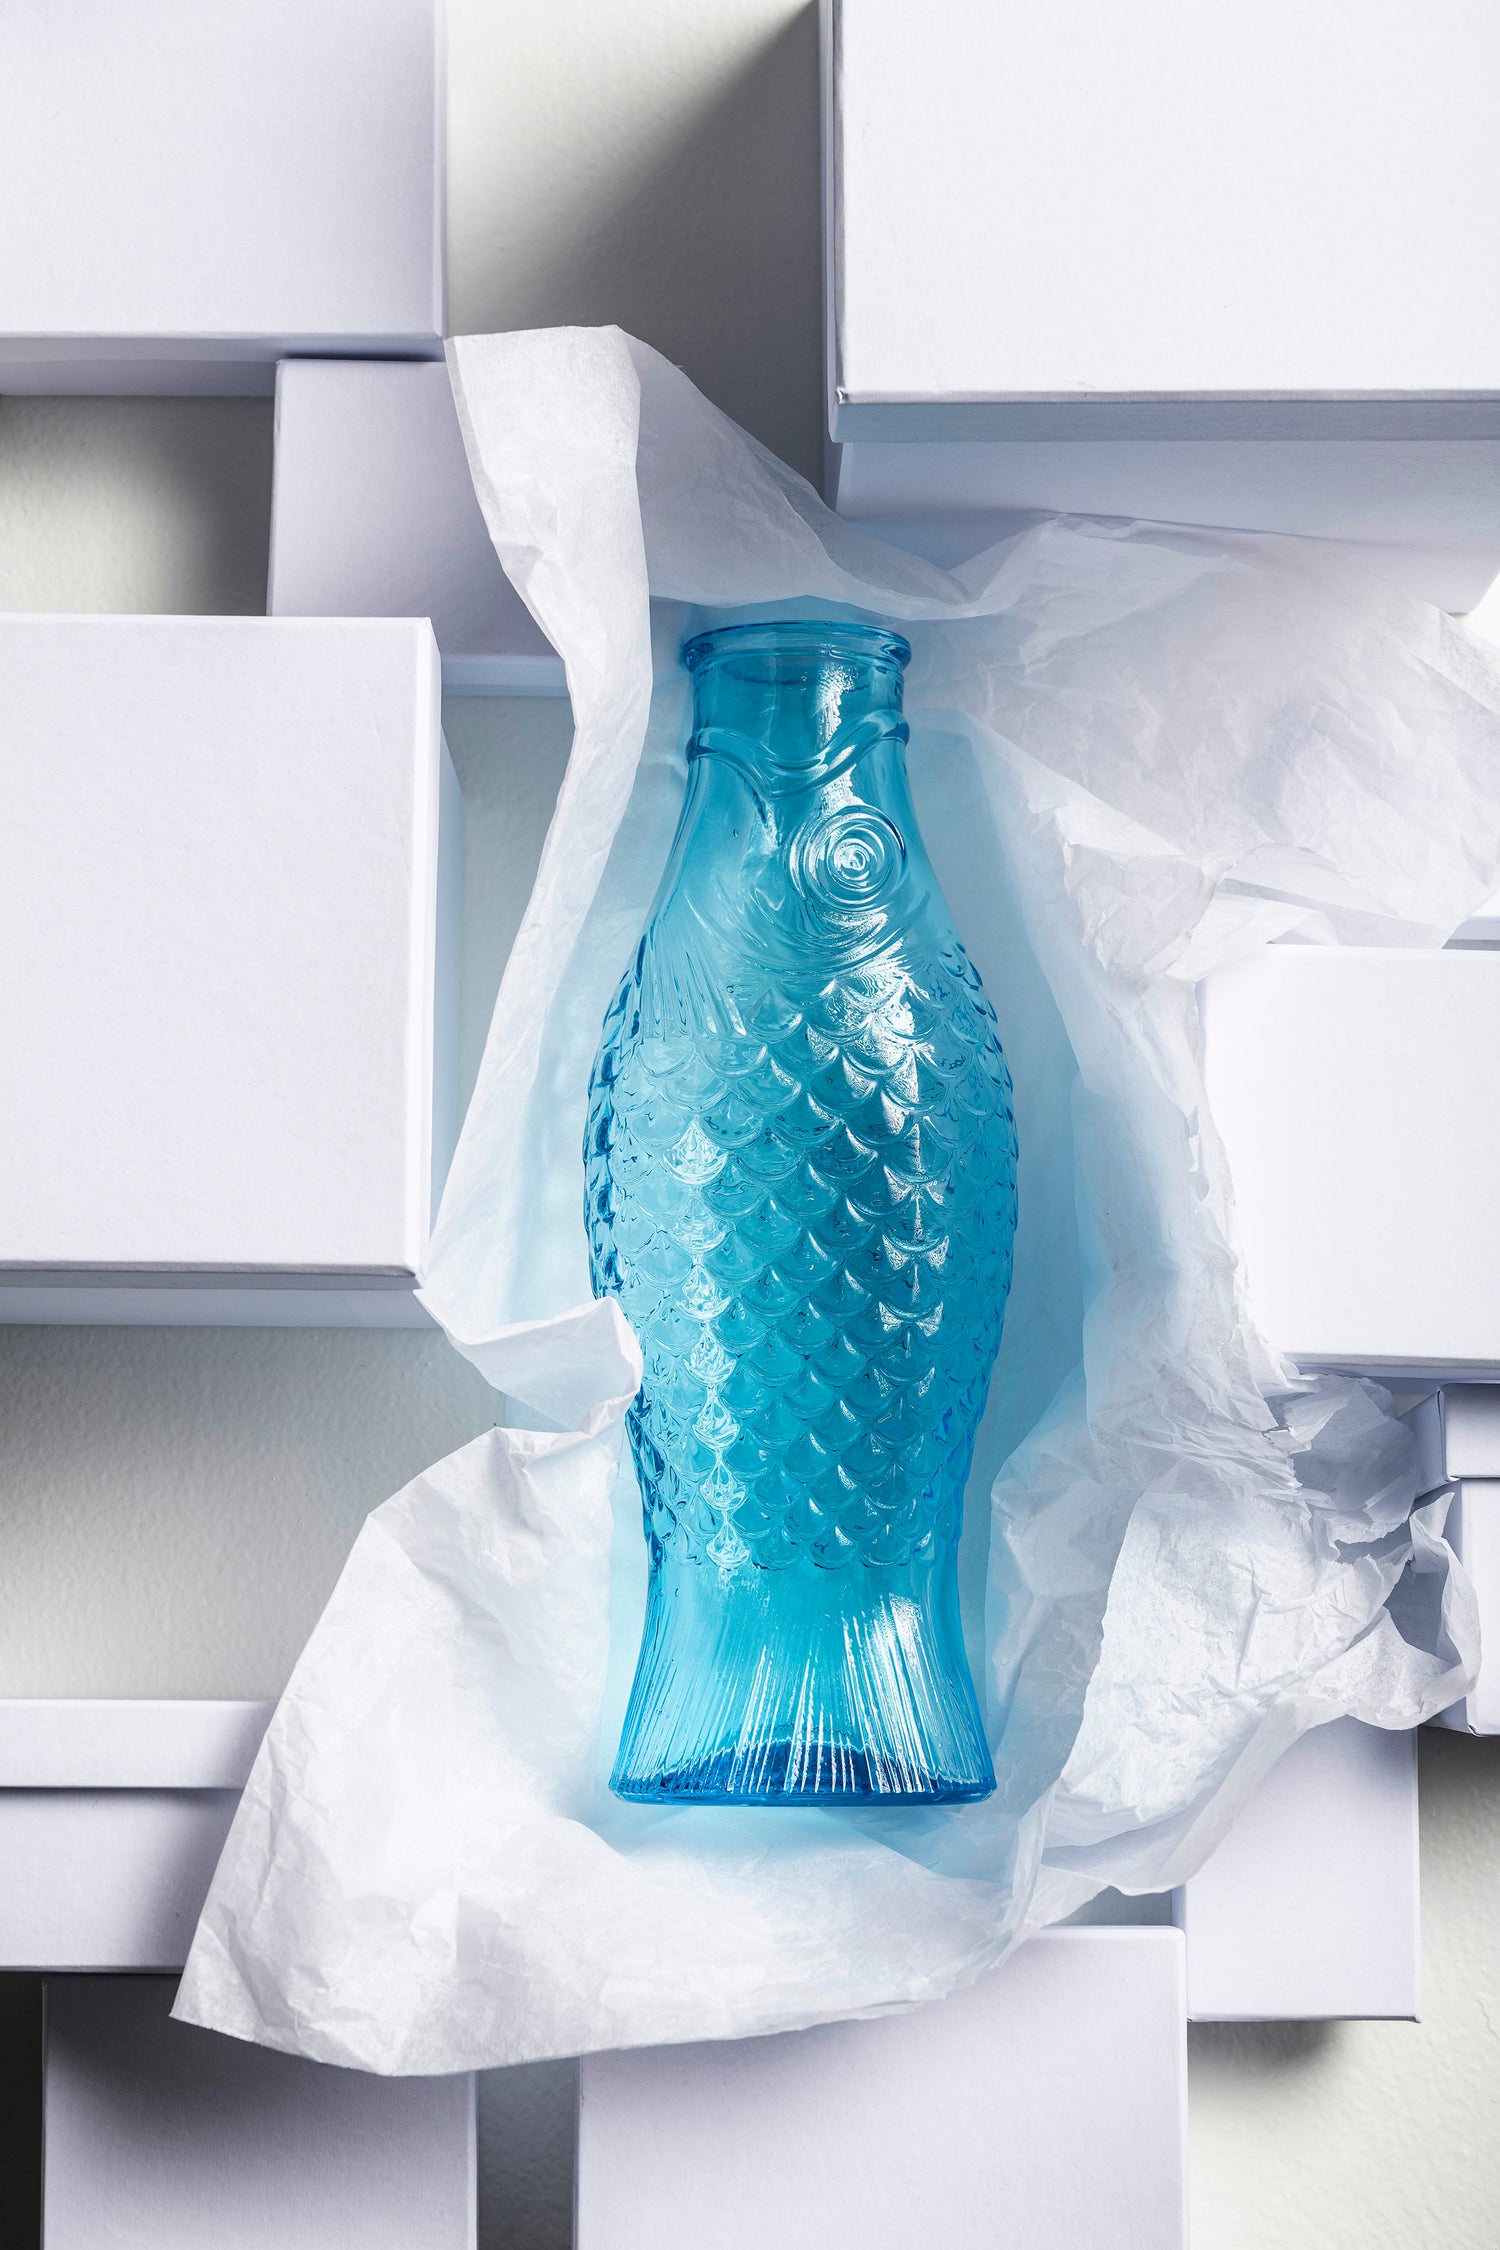 Fish & Fish Bottle, Light Blue (85 cl) by Paola Navone